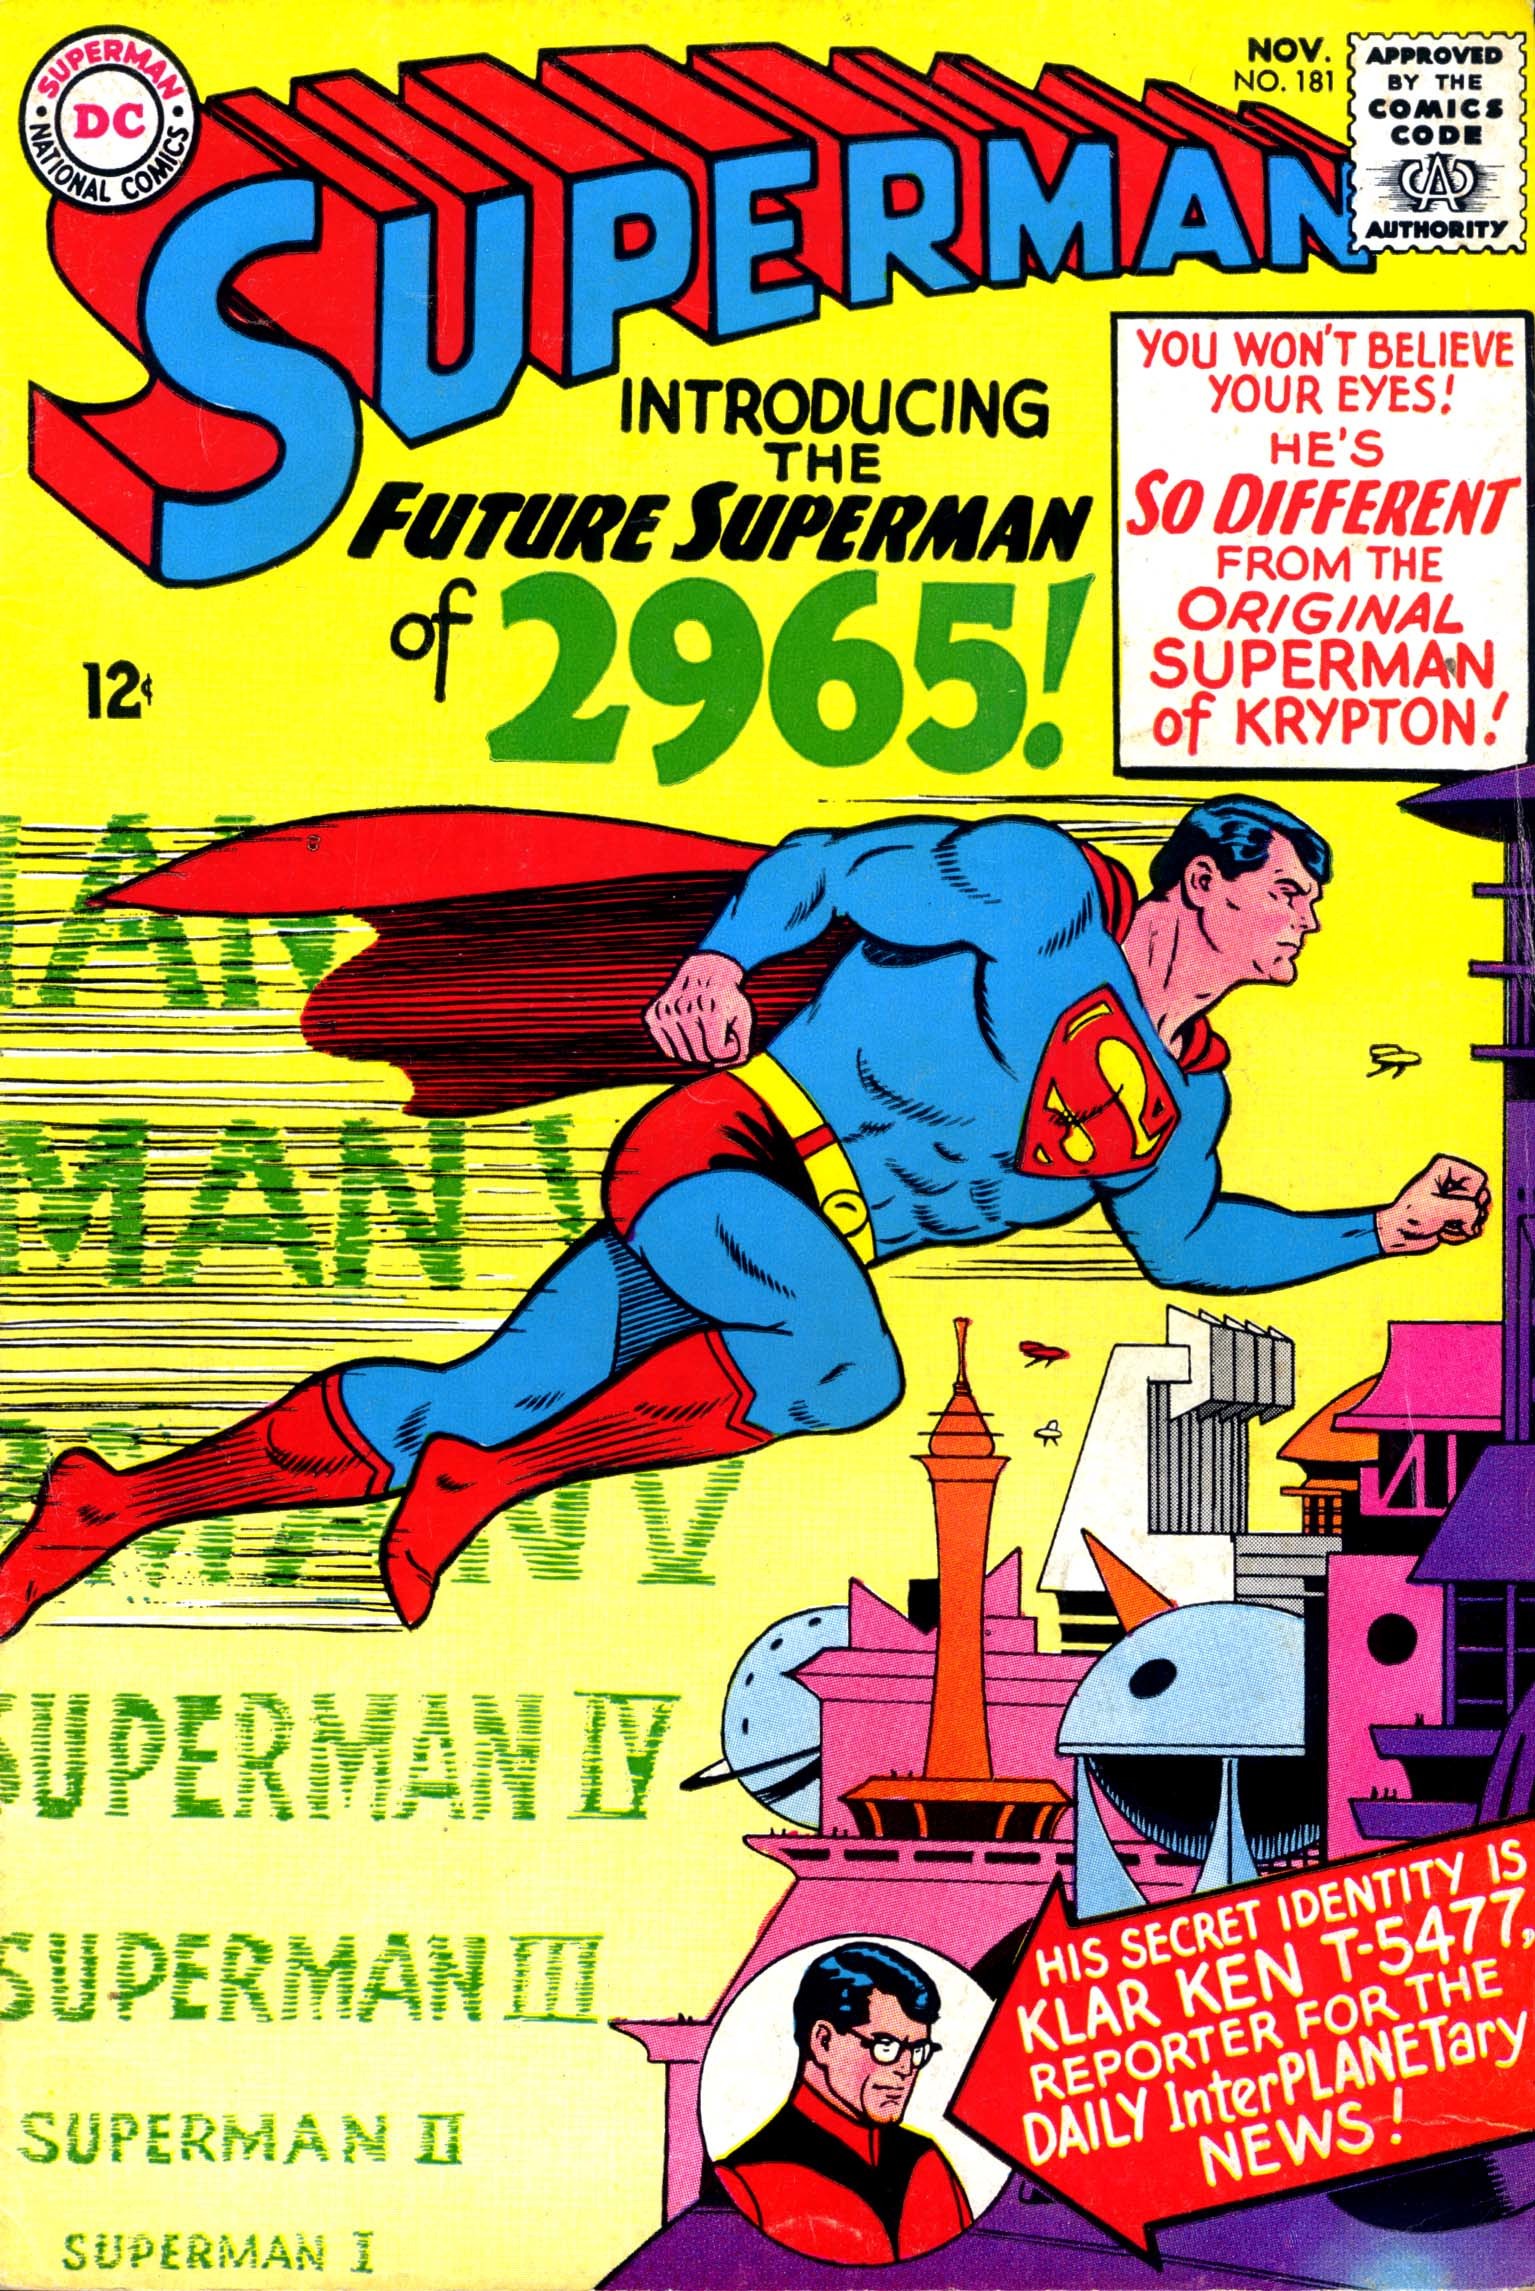 The Superman of 2966